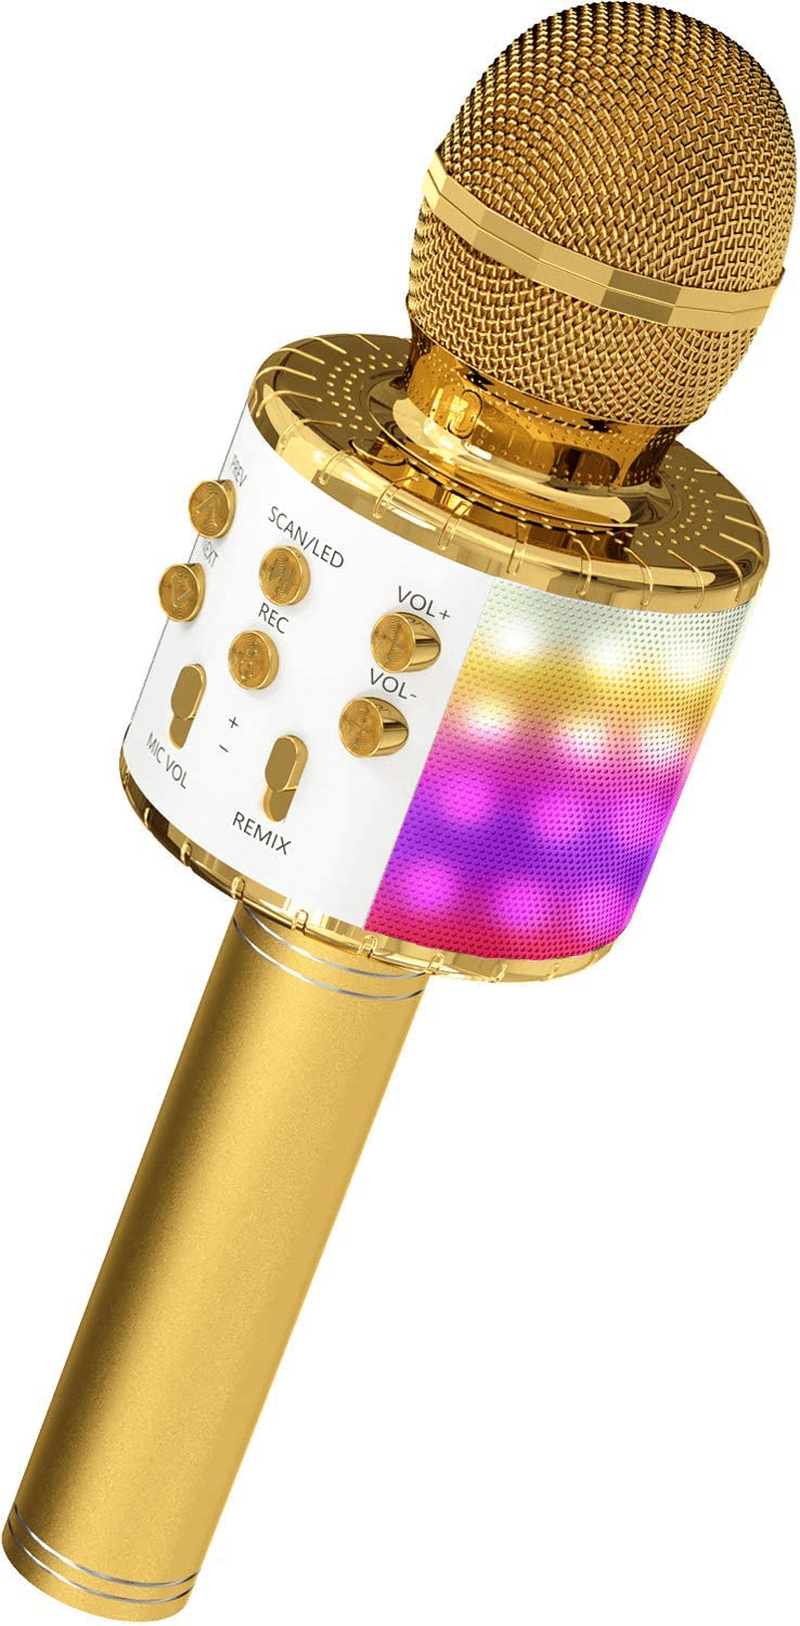 OVELLIC Karaoke Microphone for Kids, Wireless Bluetooth Karaoke Microphone with LED Lights, Portable Handheld Mic Speaker Machine, Great Gifts Toys for Girls Boys Adults All Age (Rose Gold) Electronics > Audio > Audio Components > Microphones OVELLIC Gold  